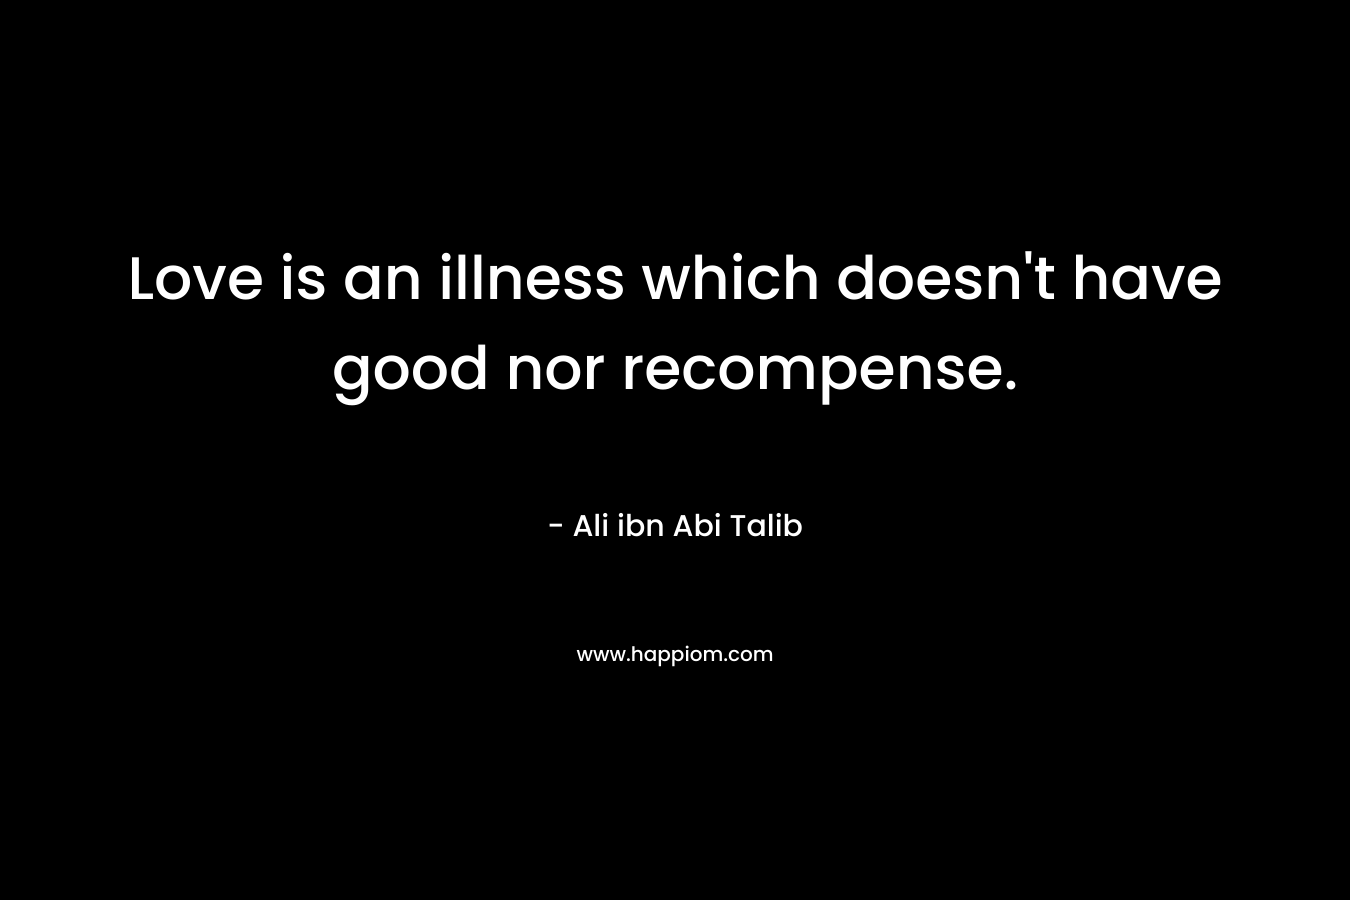 Love is an illness which doesn’t have good nor recompense. – Ali ibn Abi Talib